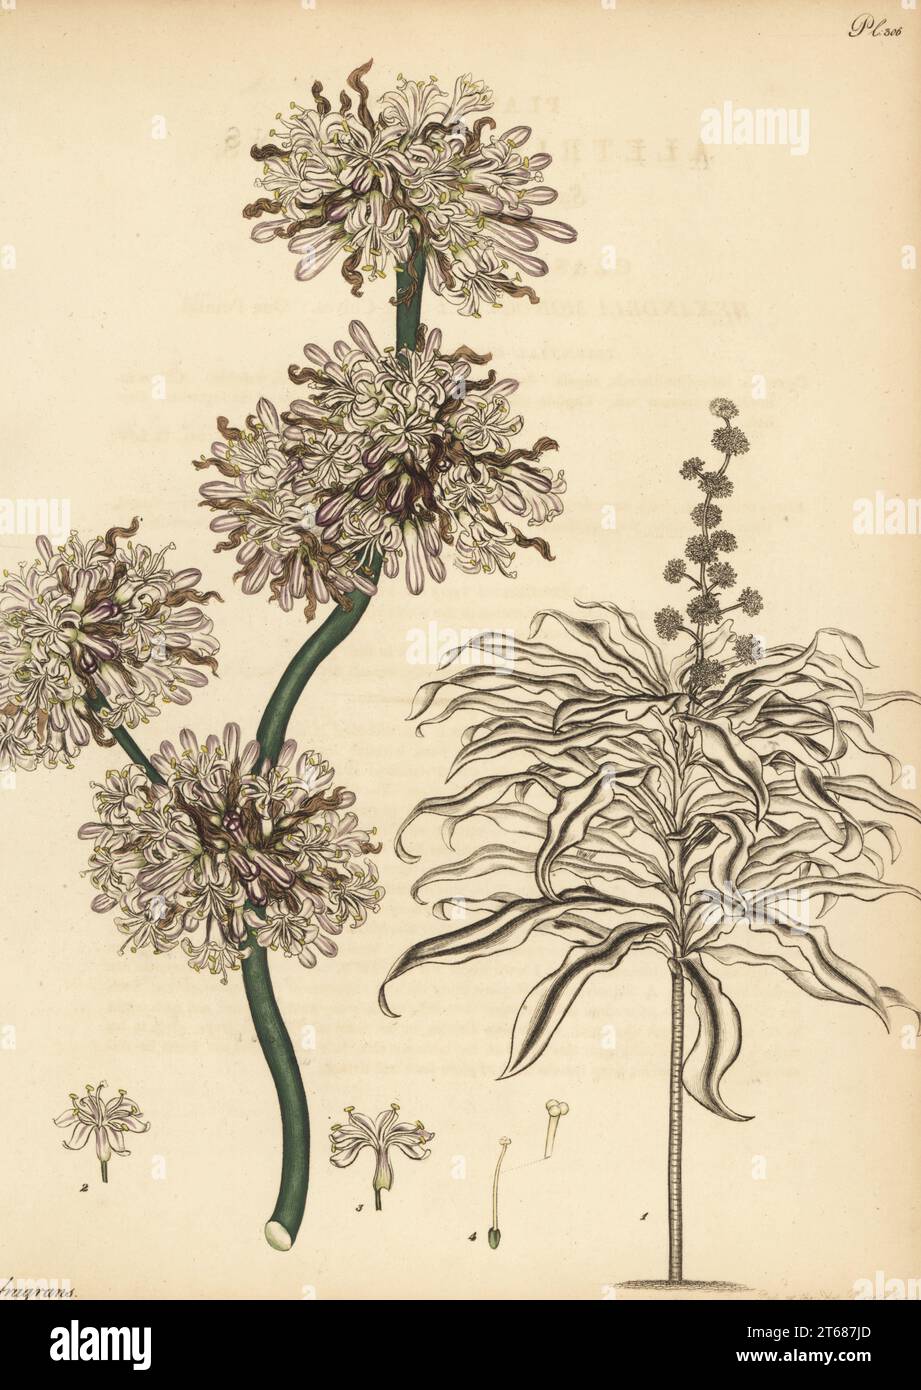 Corn plant, Dracaena fragrans. Sweet-scented aletris, Aletris fragrans. From Africa, in the collection of James Vere of Kensington Gore. Copperplate engraving drawn, engraved and hand-coloured by Henry Andrews from his Botanical Register, Volume 5, self-published in Knightsbridge, London, 1803. Stock Photo